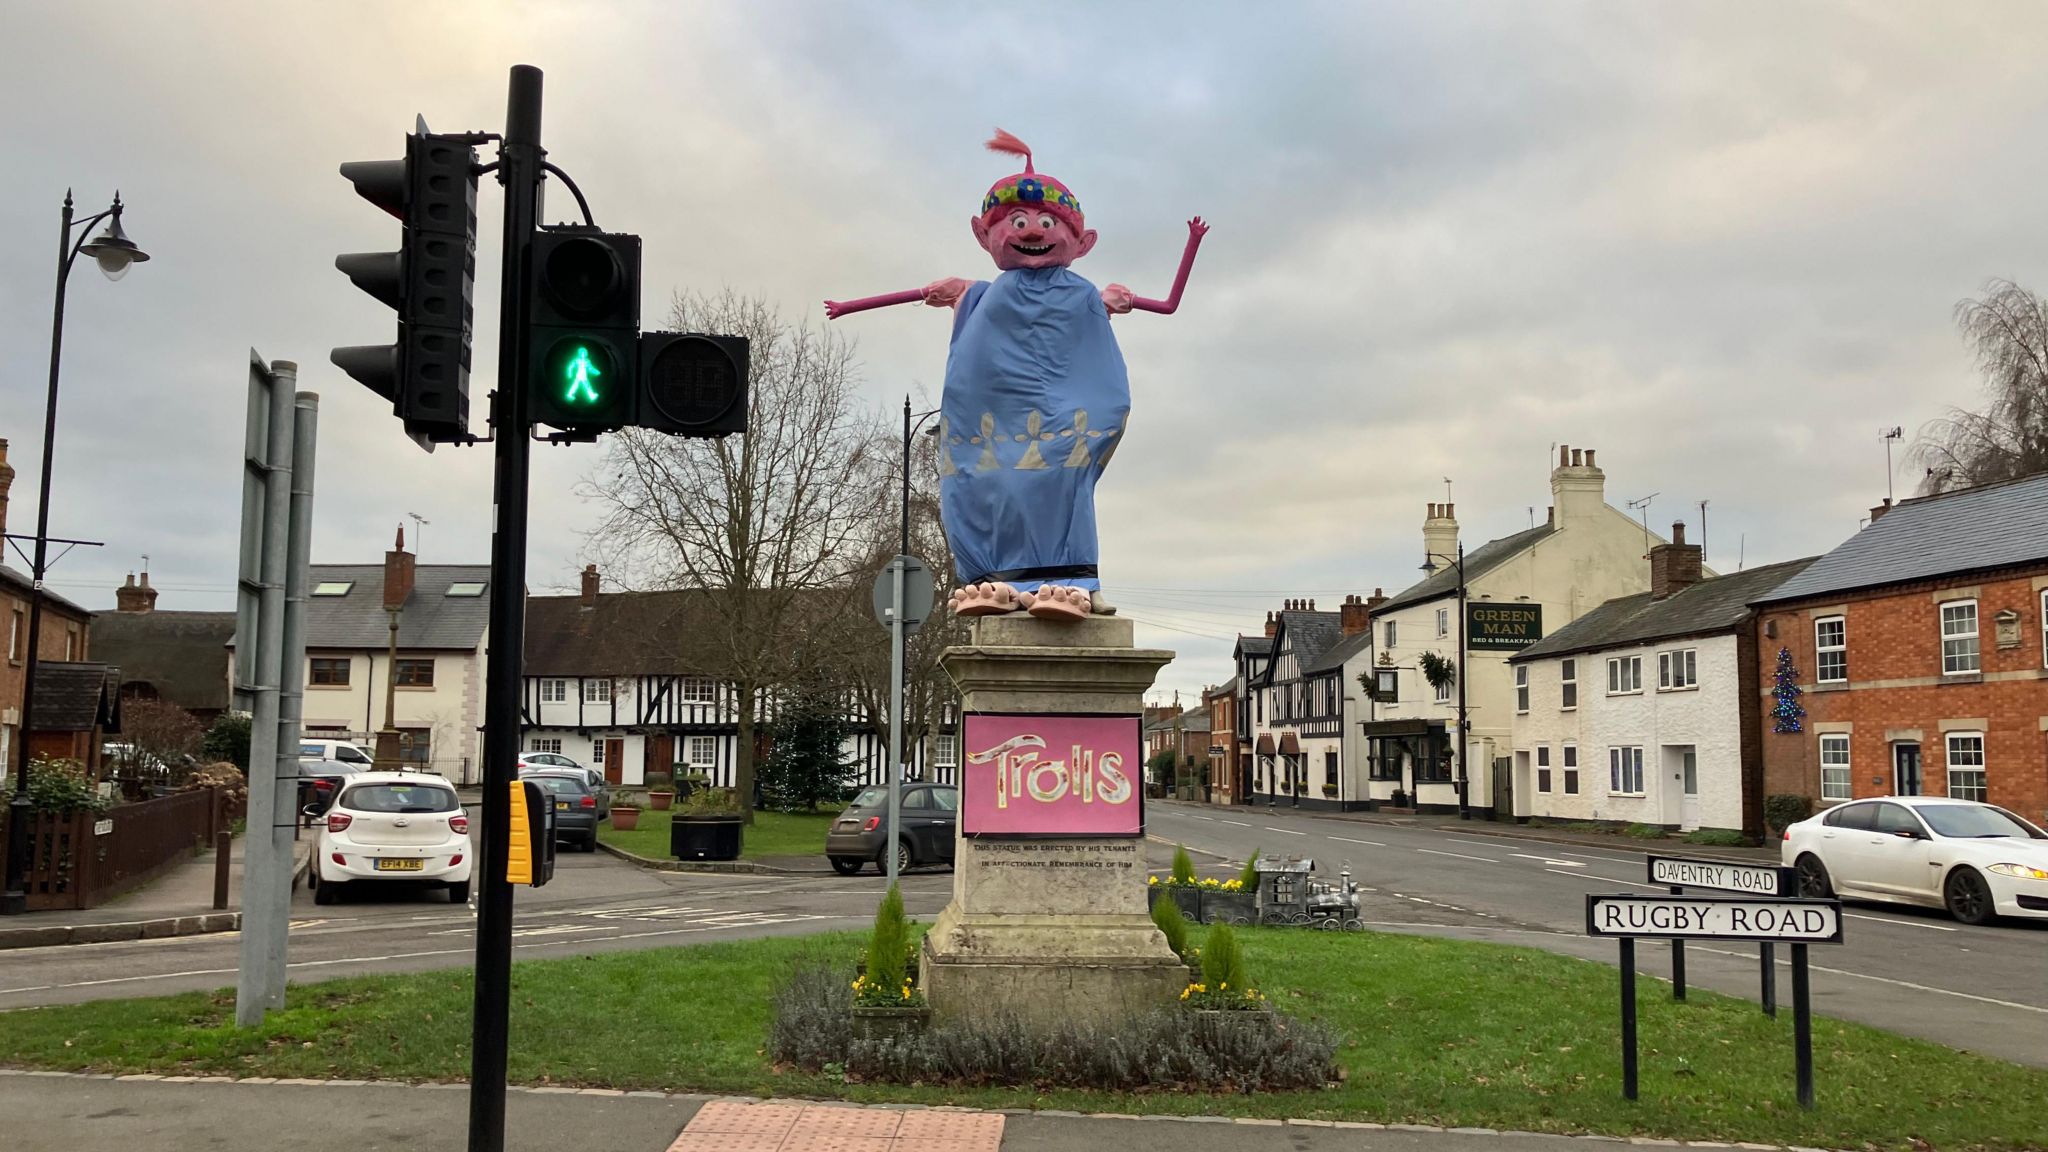 The statue in Dunchurch decorated as a Trolls character